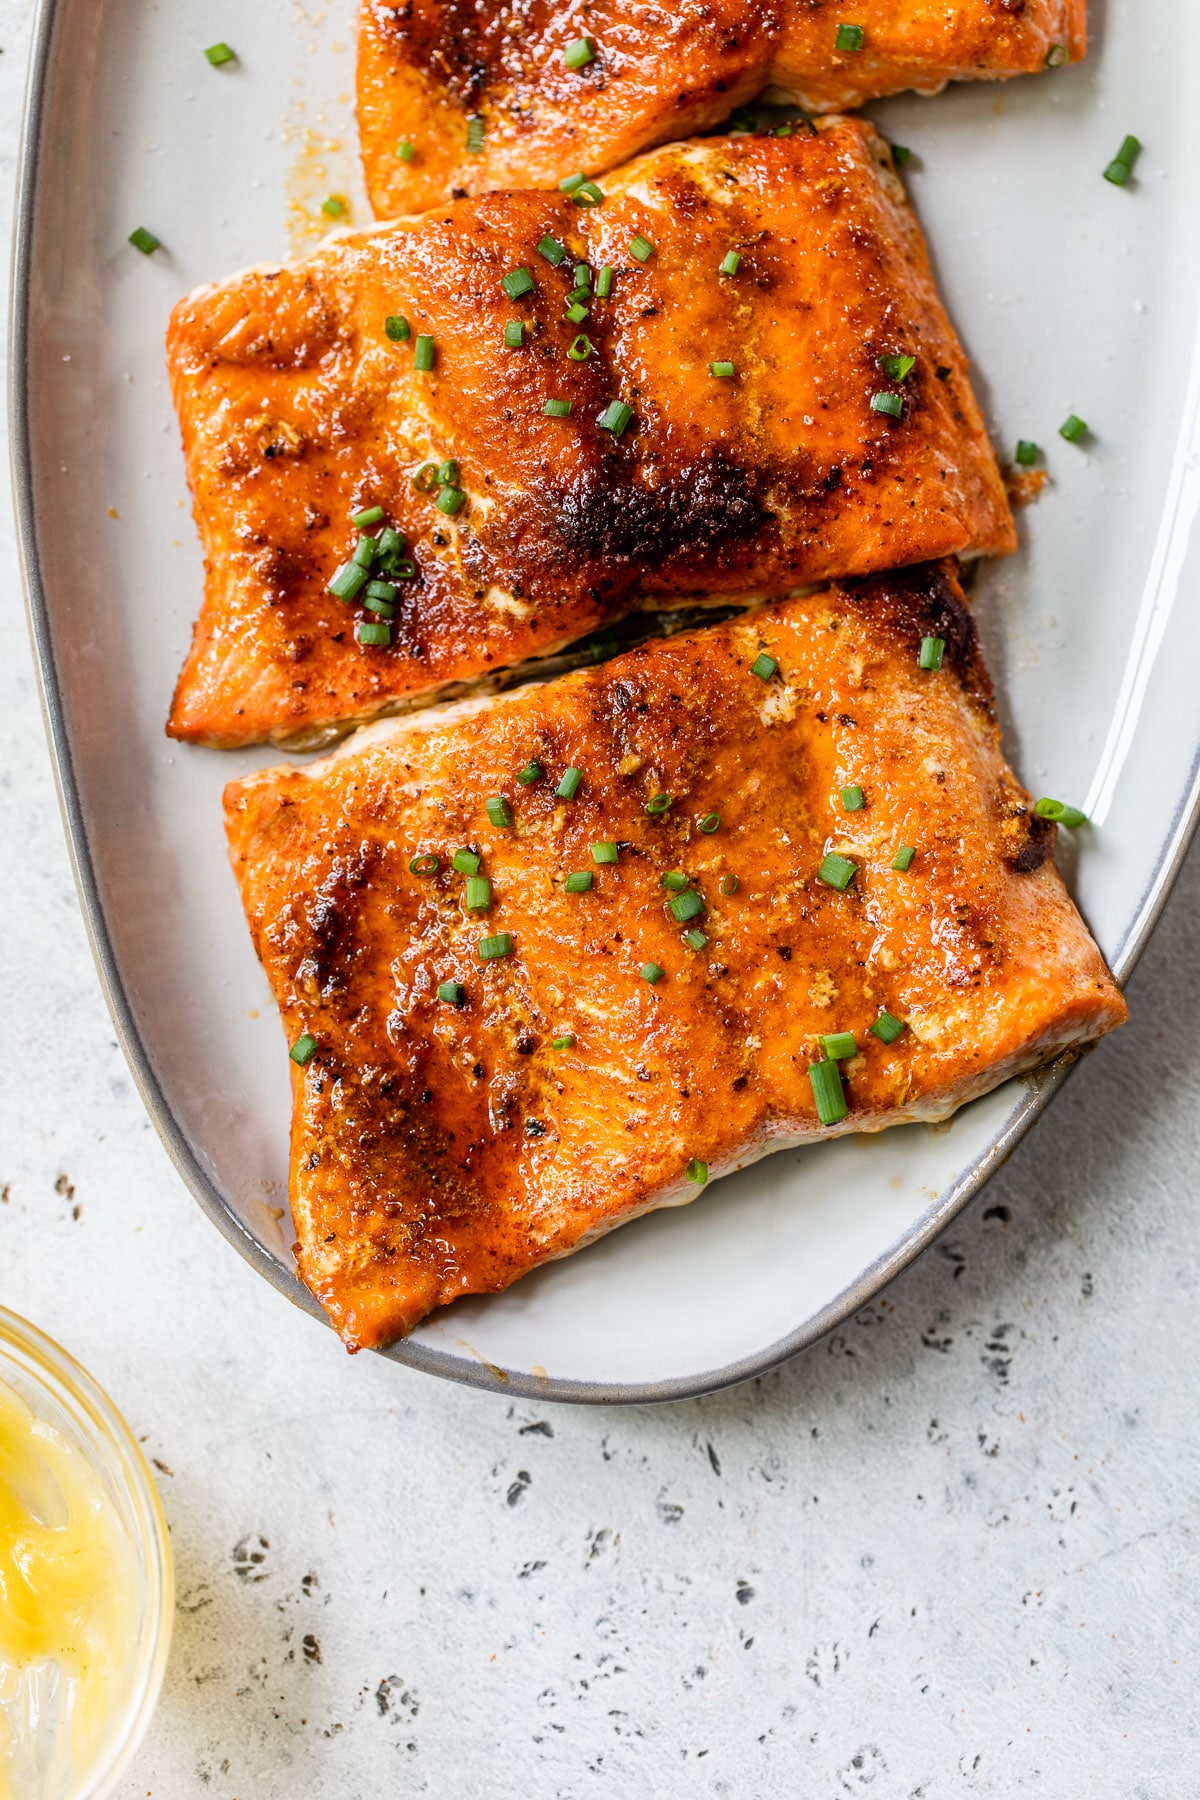 salmon fillets on a platter sprinkled with chives